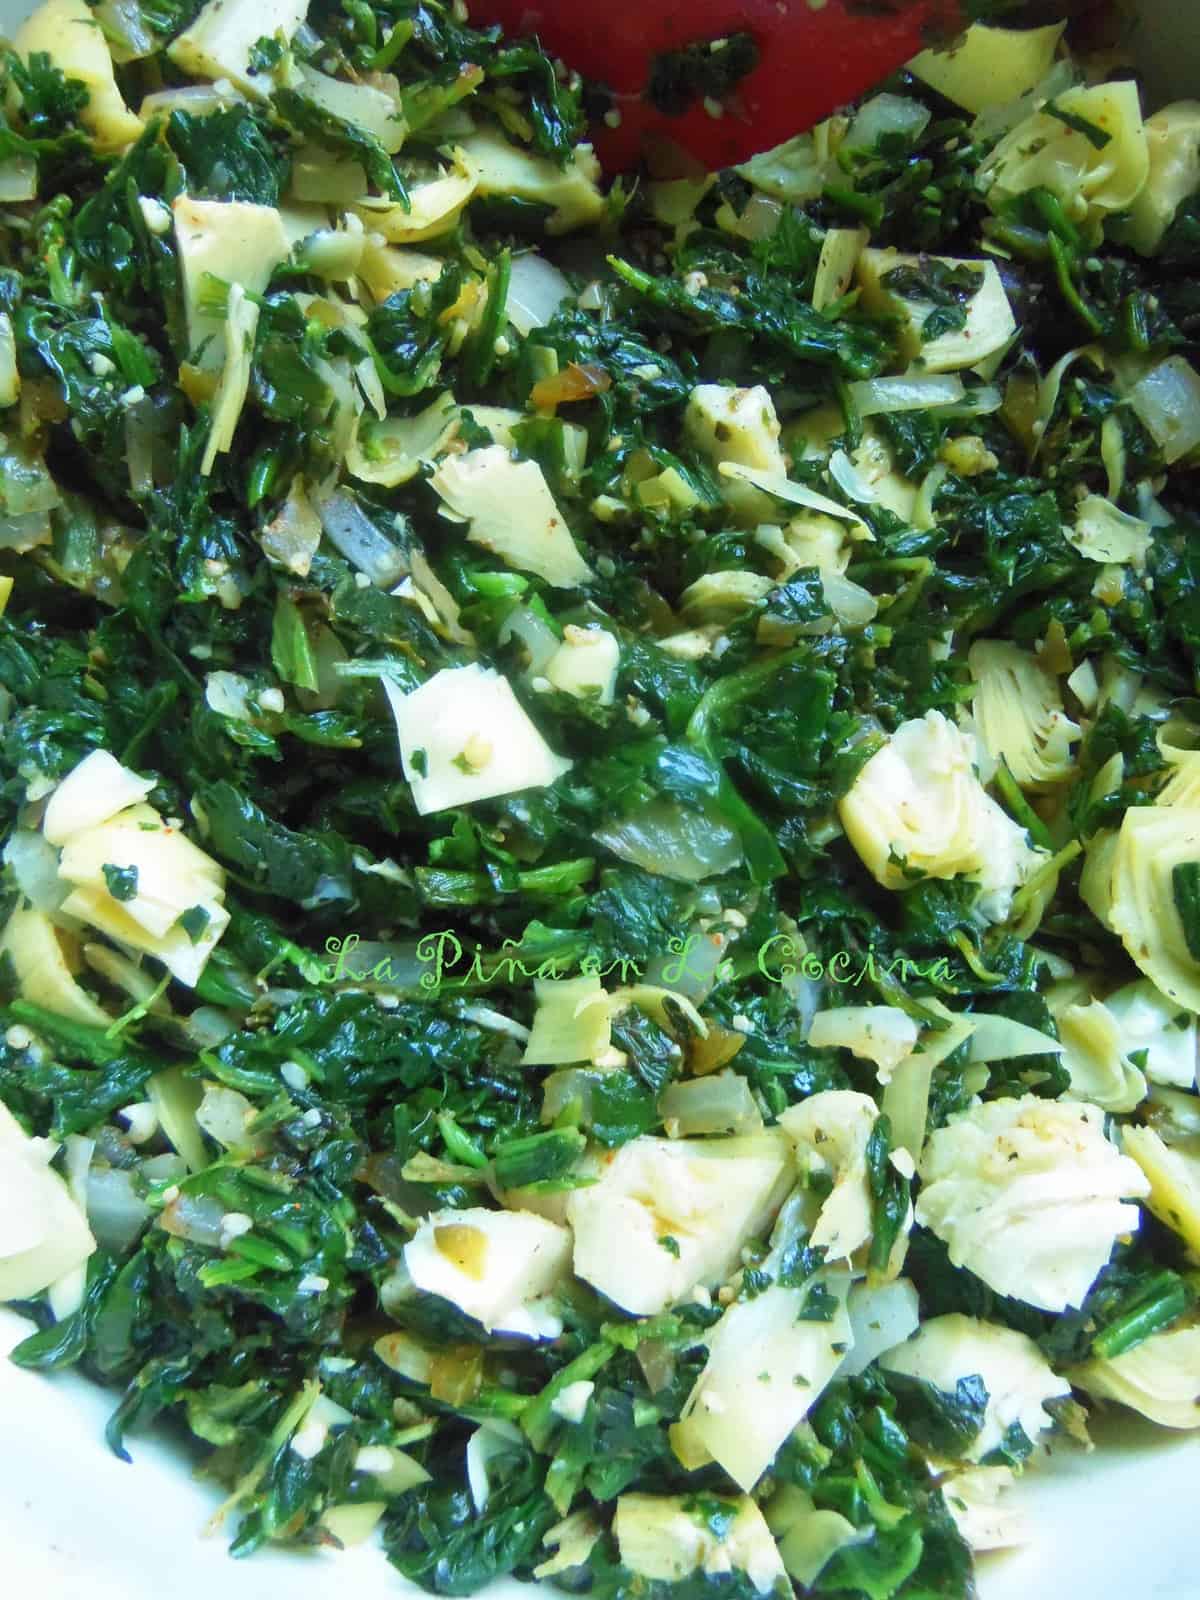 This recipe for Spinach and Artichoke can be used with the tomato base sauce as well as the bechamel sauce.